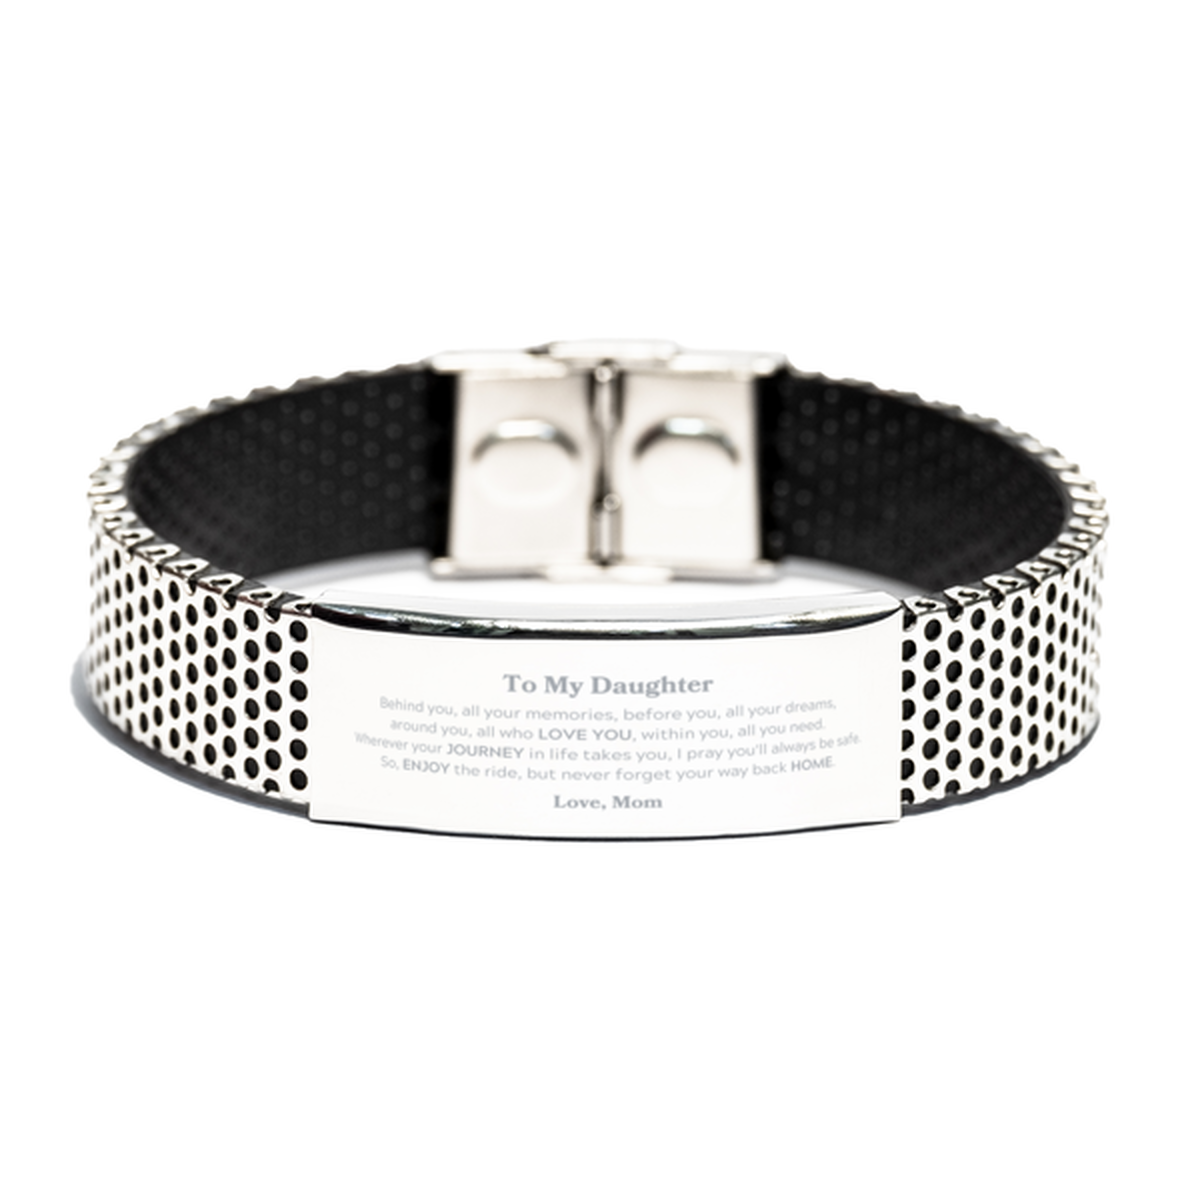 To My Daughter Graduation Gifts from Mom, Daughter Stainless Steel Bracelet Christmas Birthday Gifts for Daughter Behind you, all your memories, before you, all your dreams. Love, Mom